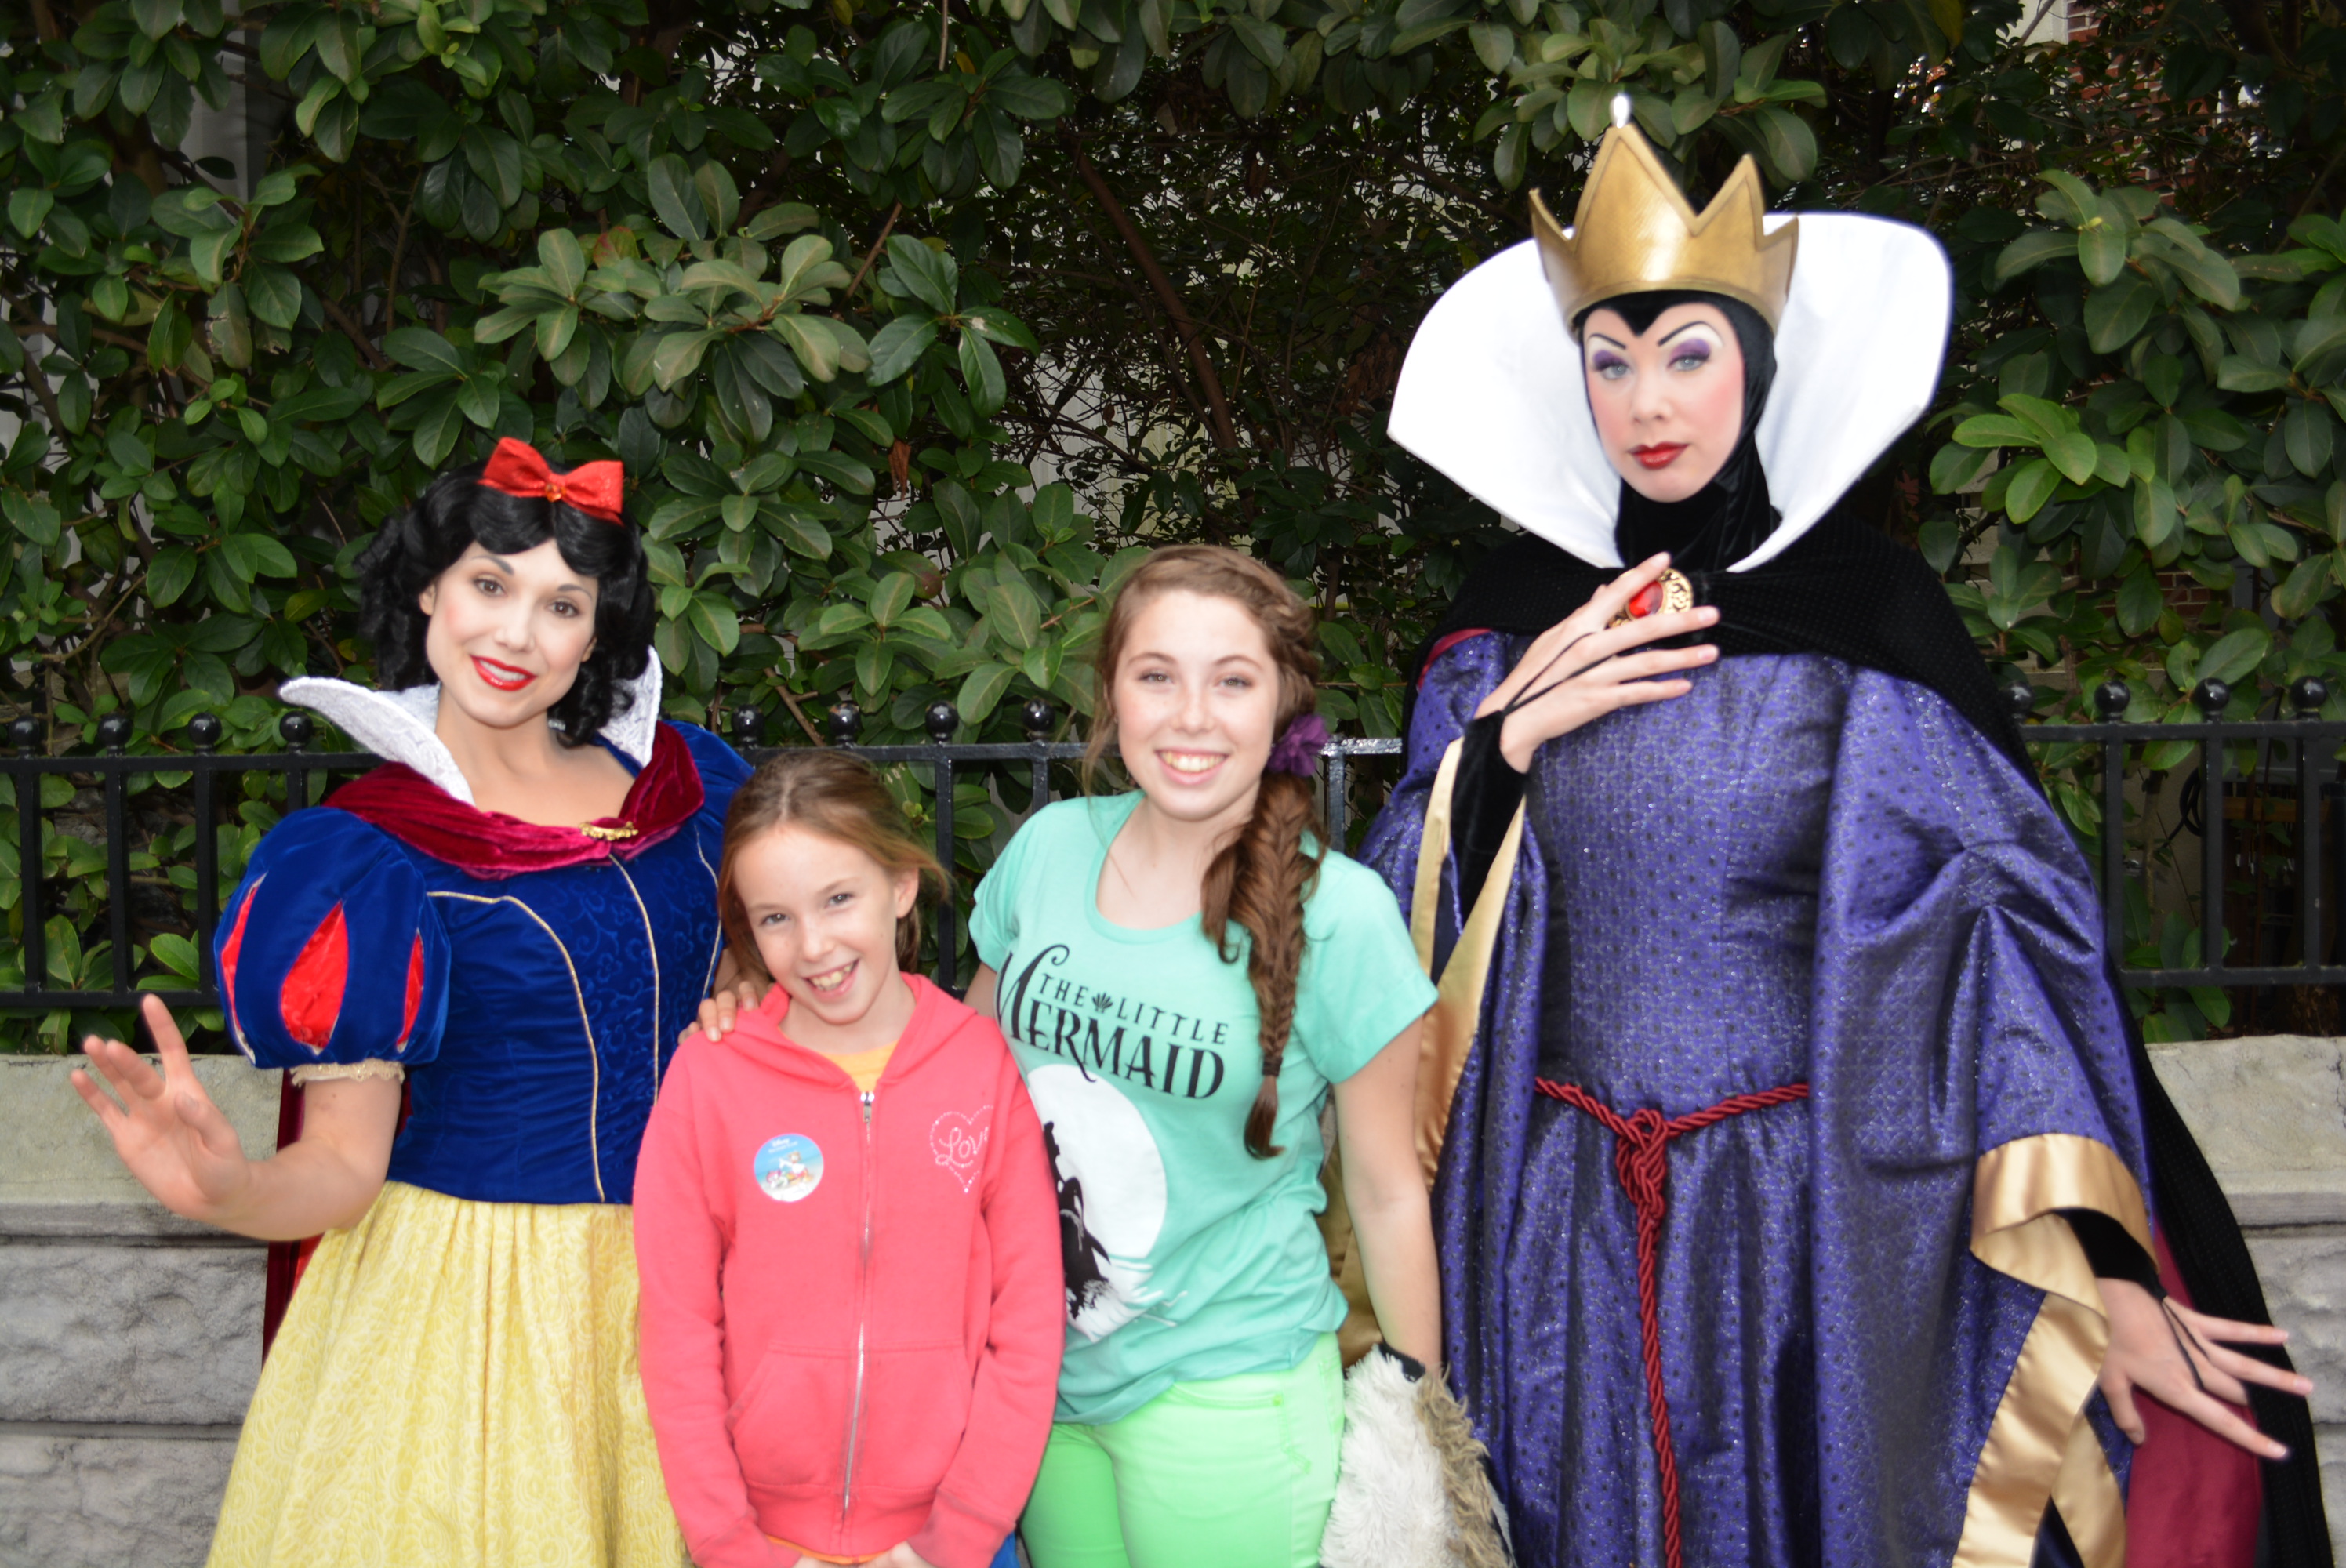 Walt Disney World, Hollywood Studios, Streets of America, Character Palooza, Snow White, Snow Queen, Evil Queen Grimhilde